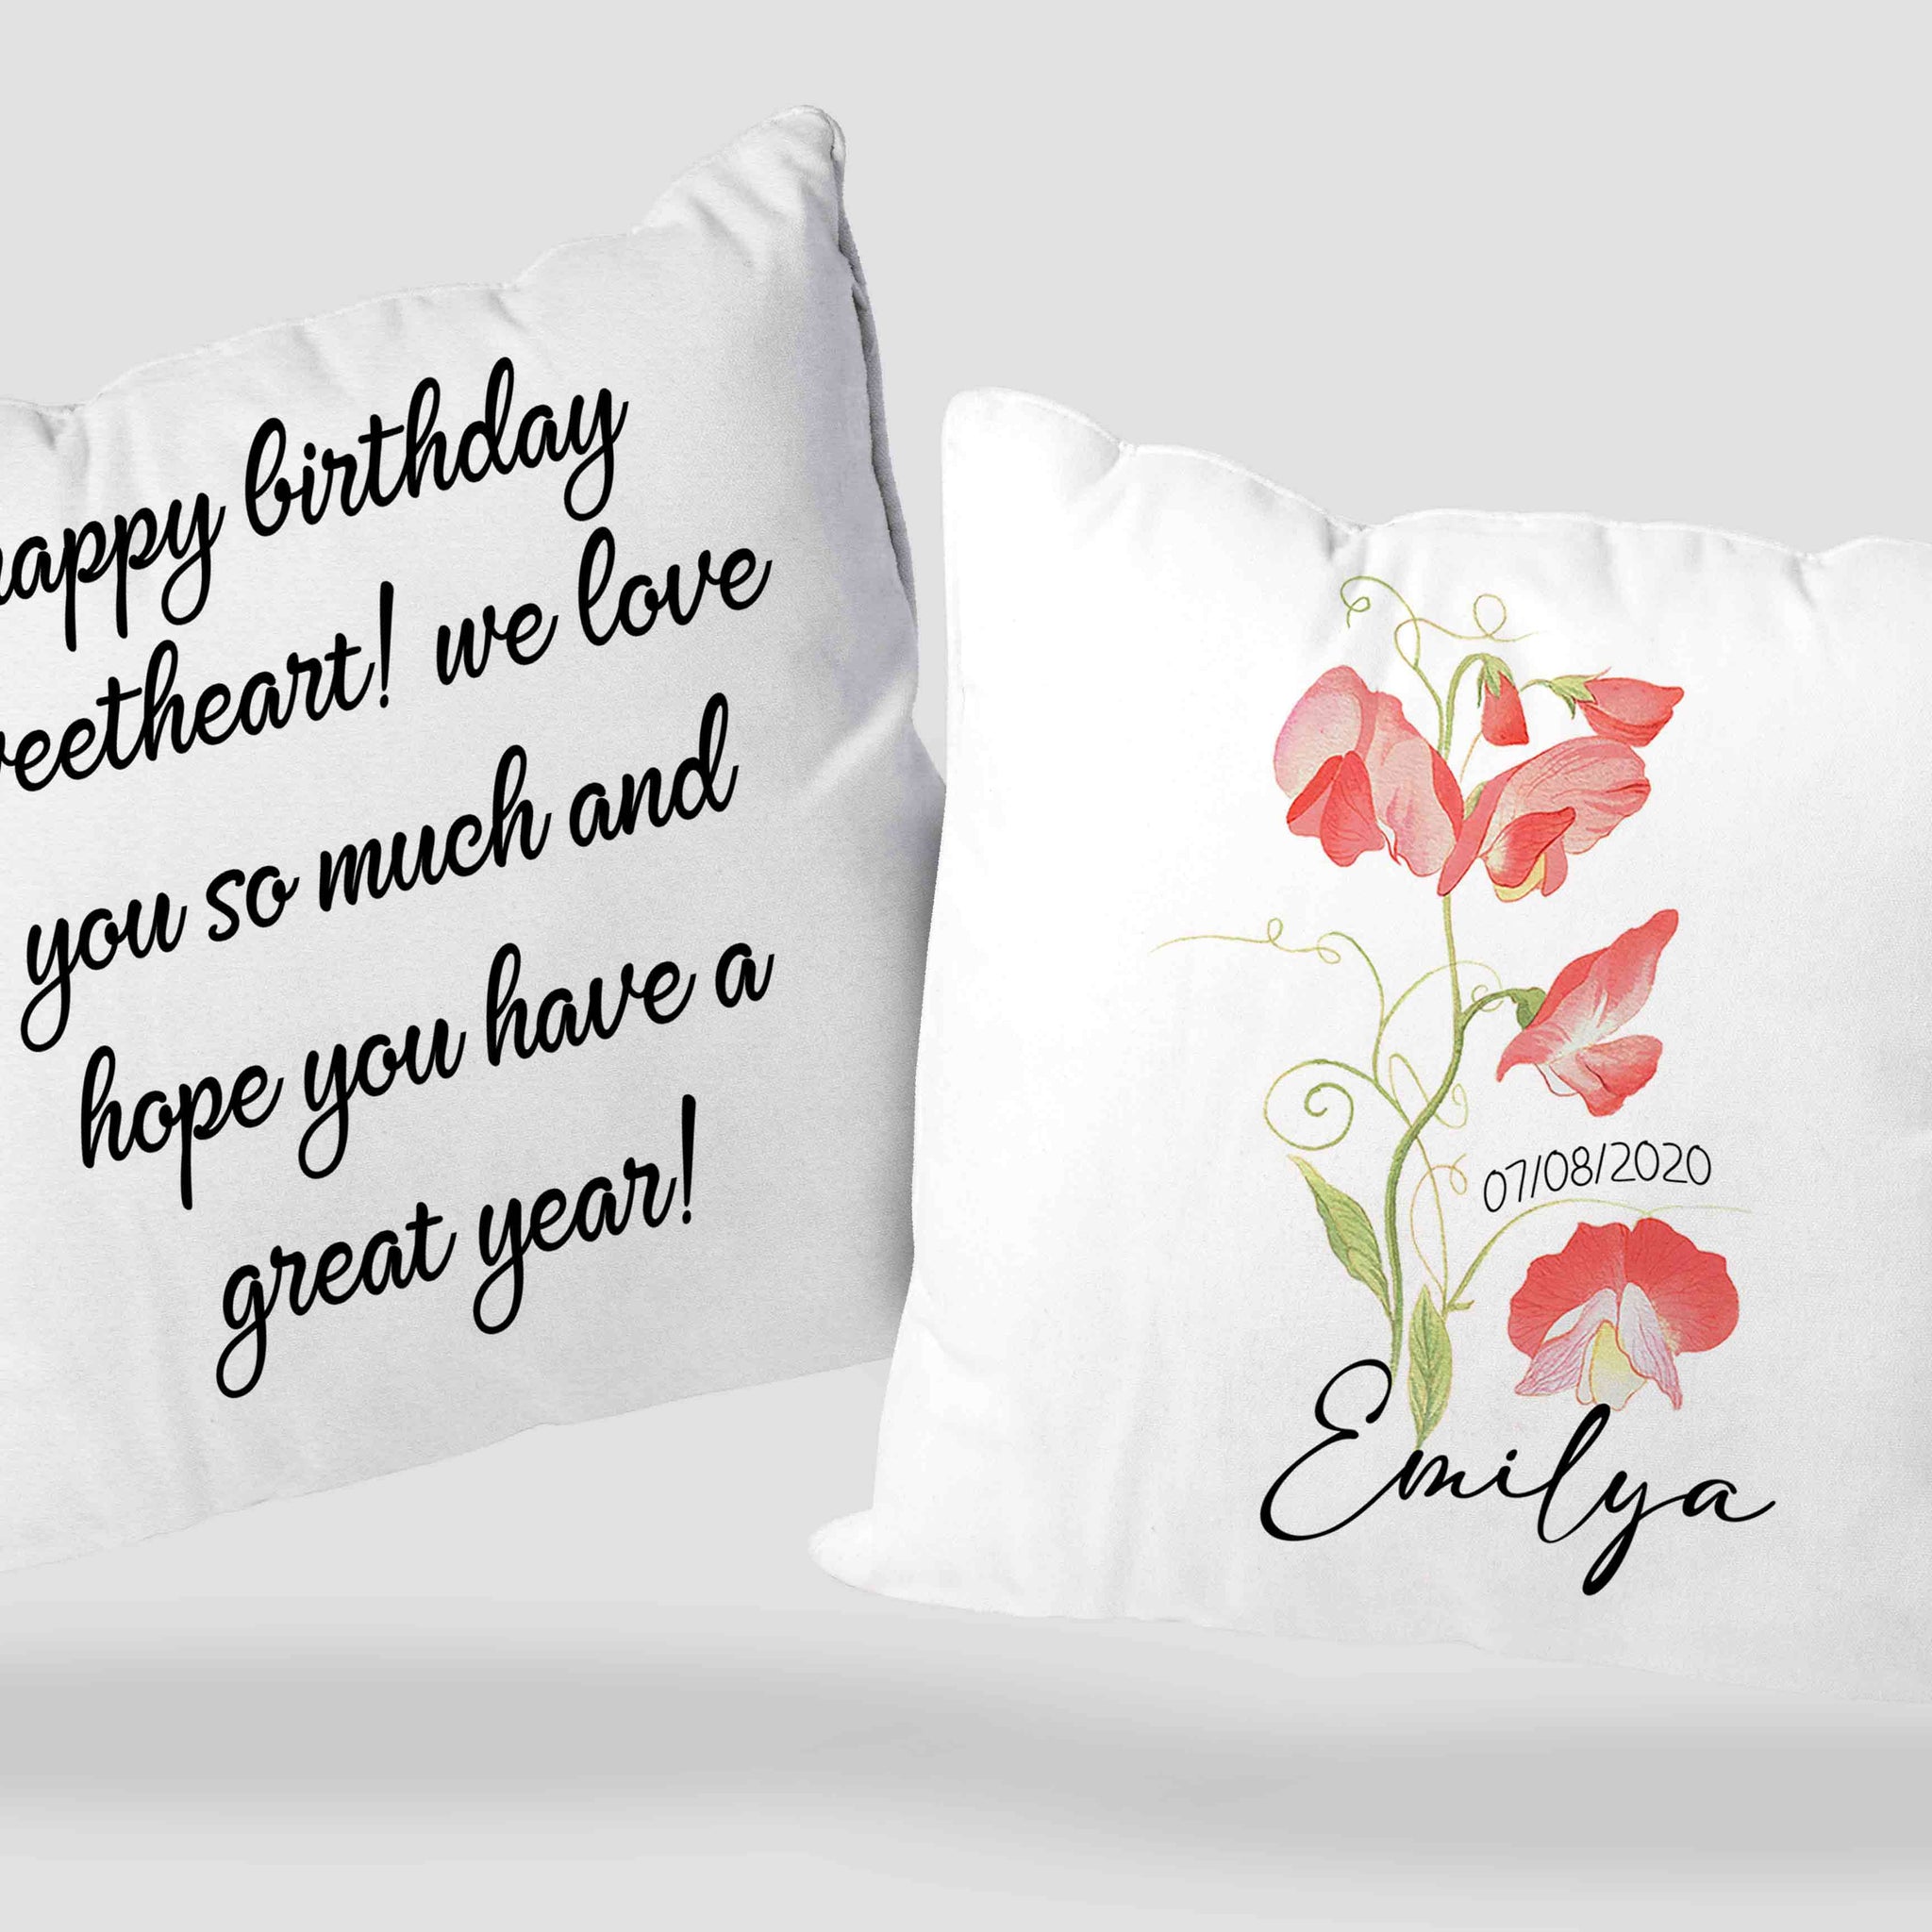 Personalized Birth Month Flower Pillow, Happy Birthday Pillow, Pillow Gift For Birthday, Birthday Gift for Friend, Gift for Sister